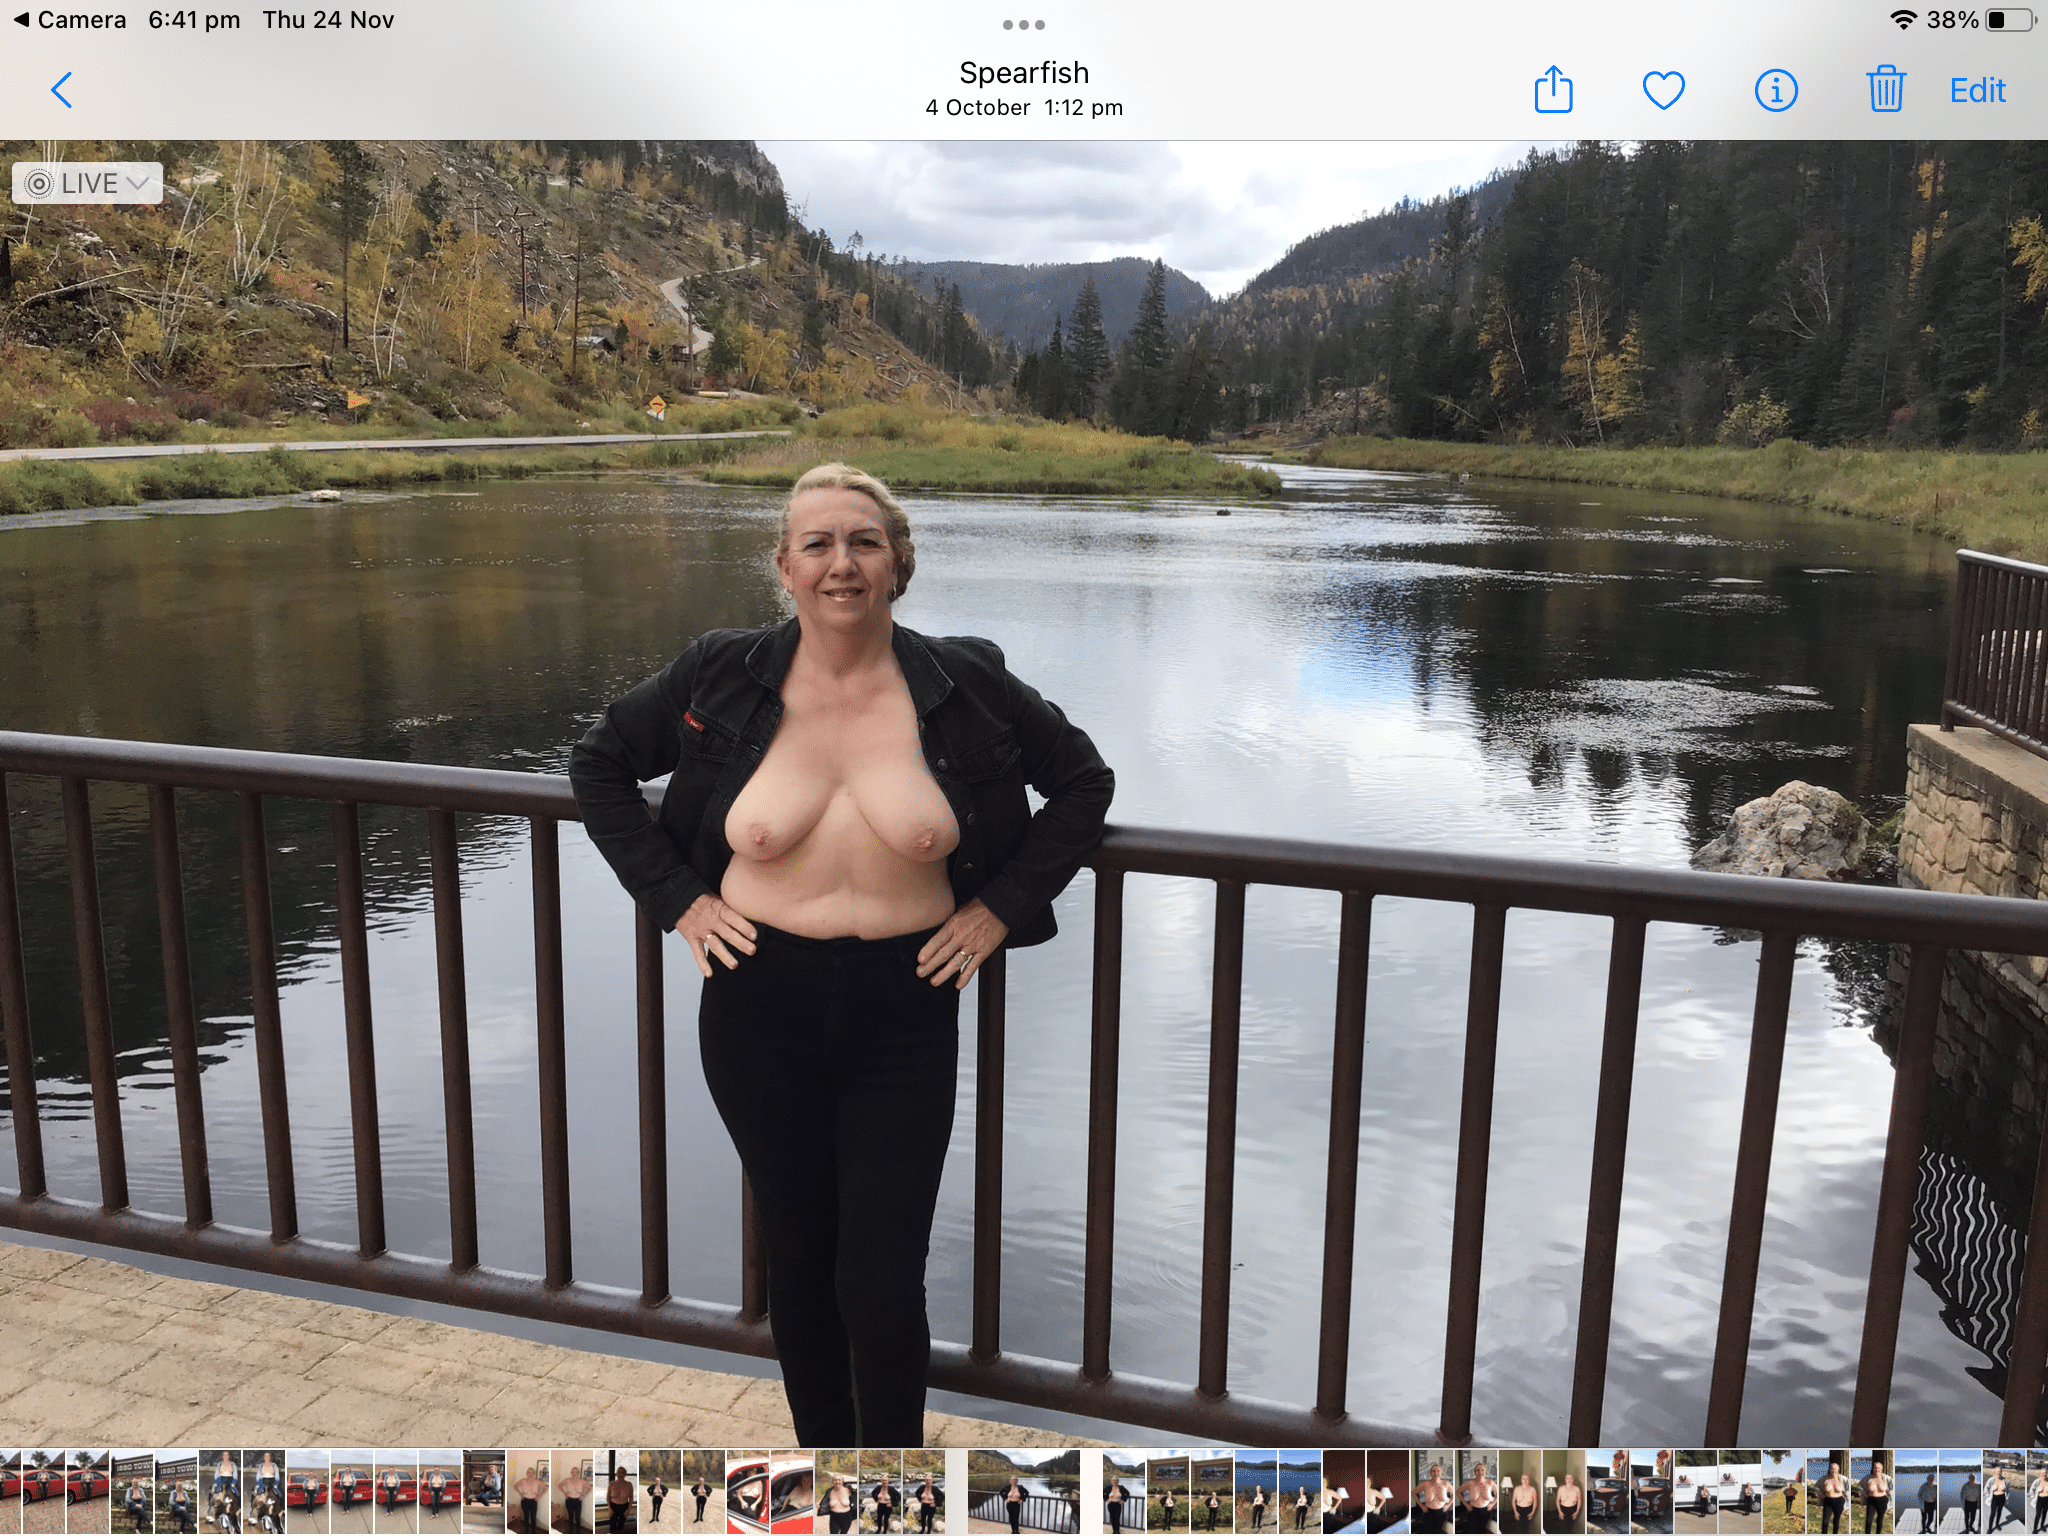 Real Amateurs Mature Flashing Pics Hotwife Pics Boobs Flash Pics  : Love showing my tits for all to enjoy Getting my natural tits out at the lake